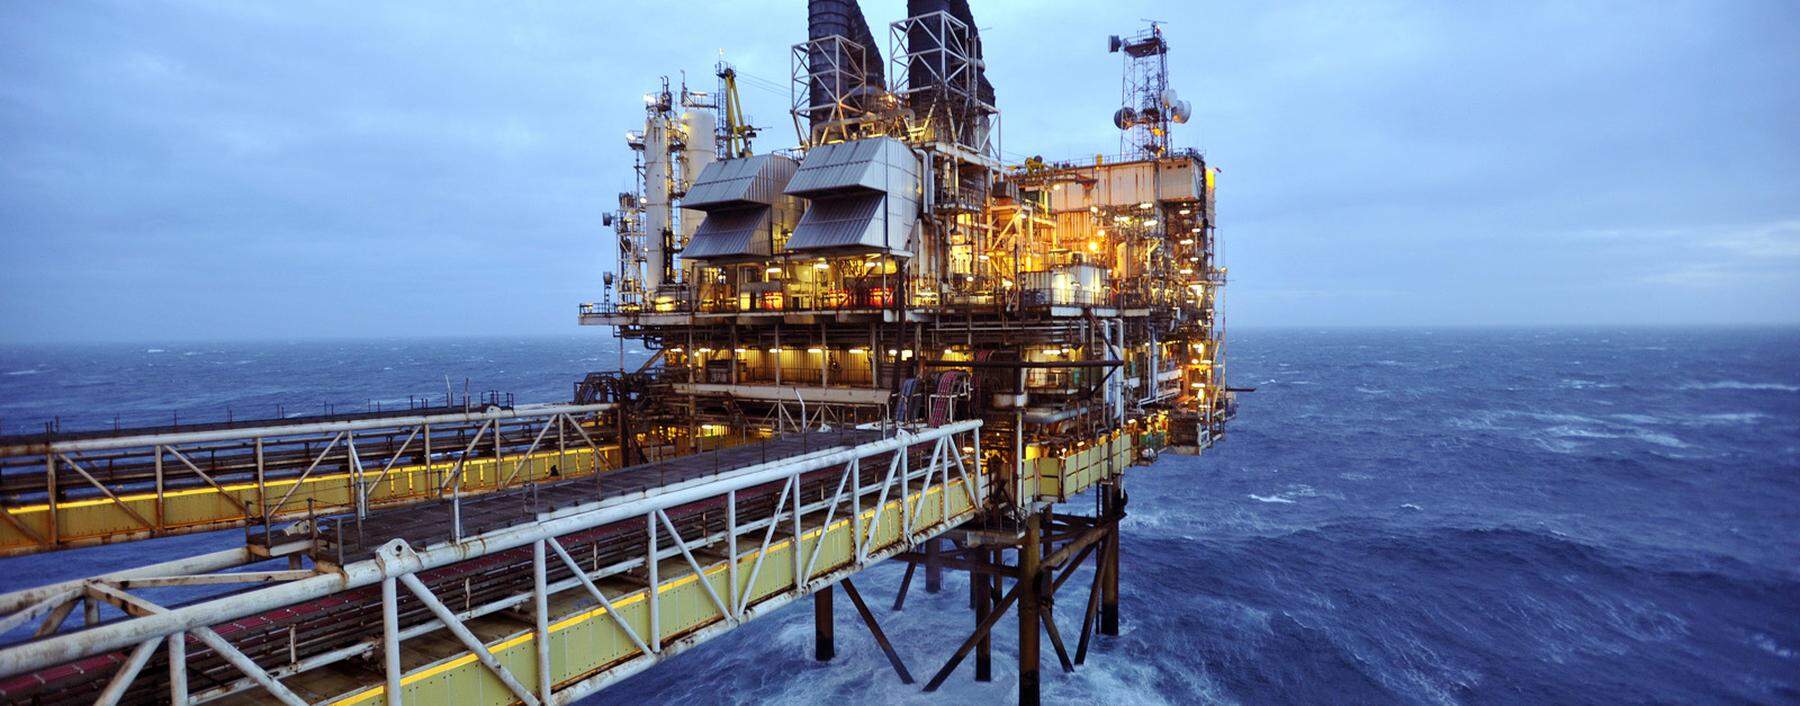 File photo of a section of the BP Eastern Trough Area Project oil platform in the North Sea